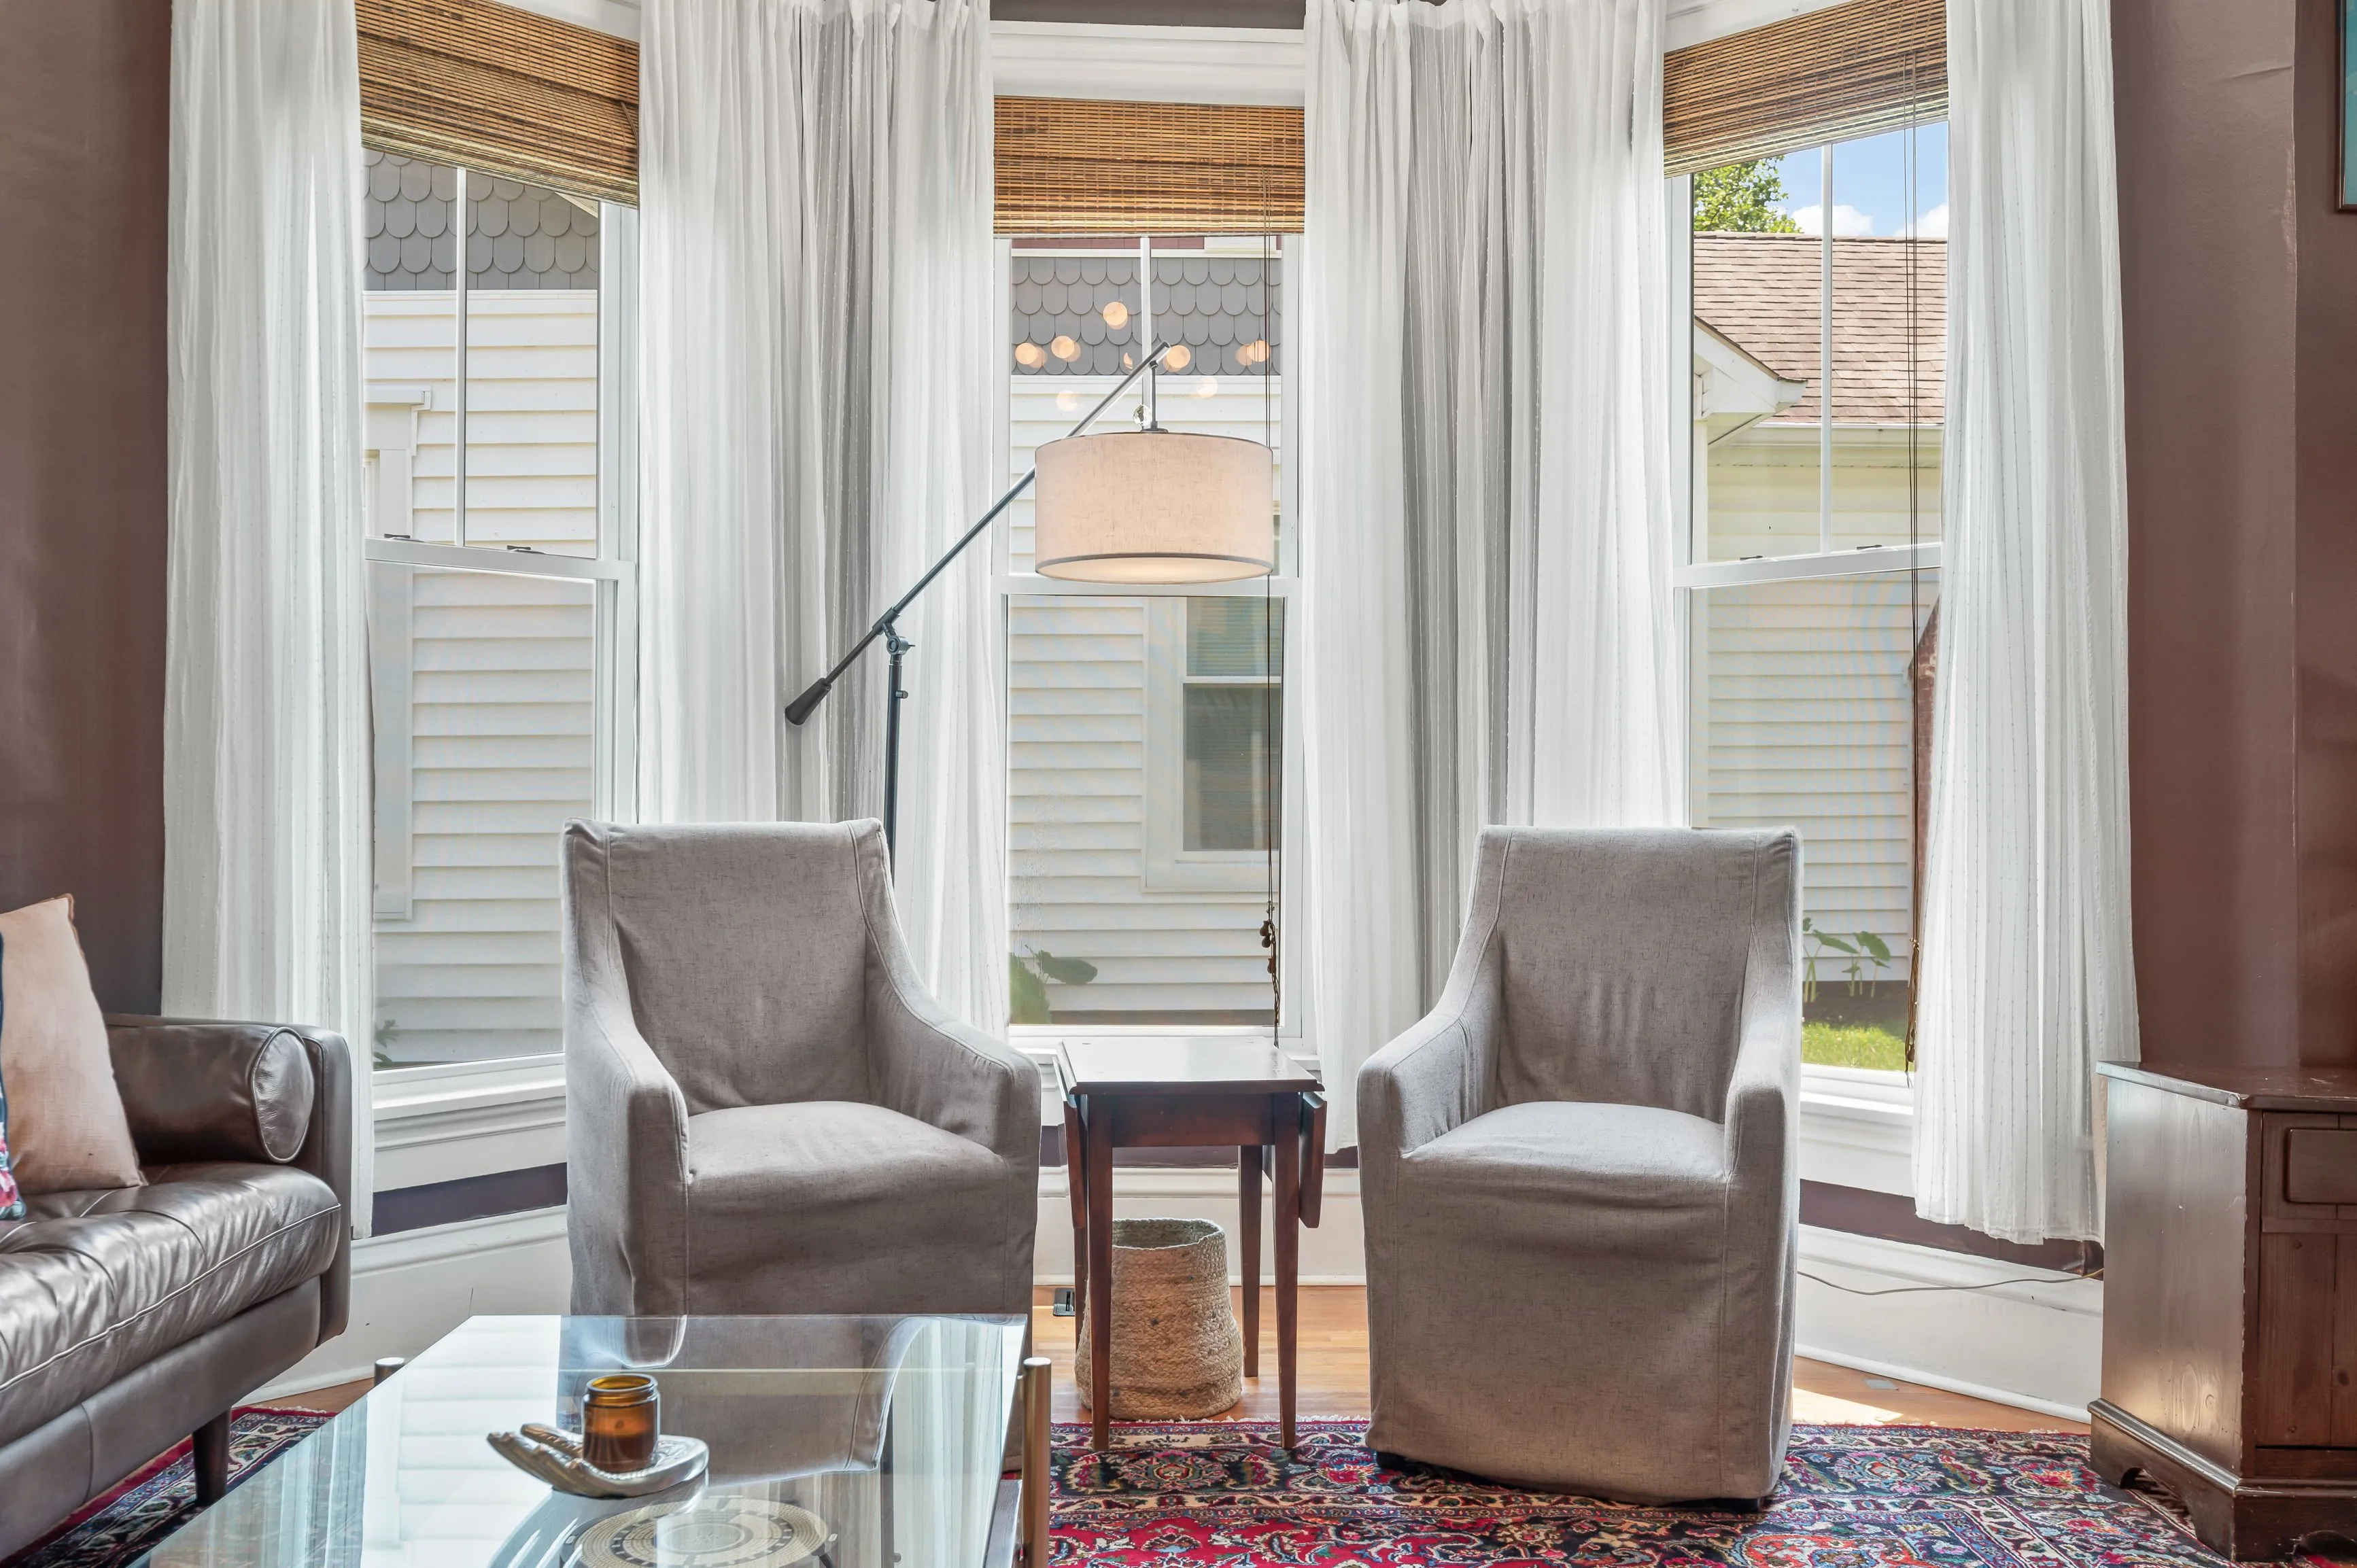 Bright living room interior with two armchairs, a sofa, sheer curtains, and a view of a balcony.